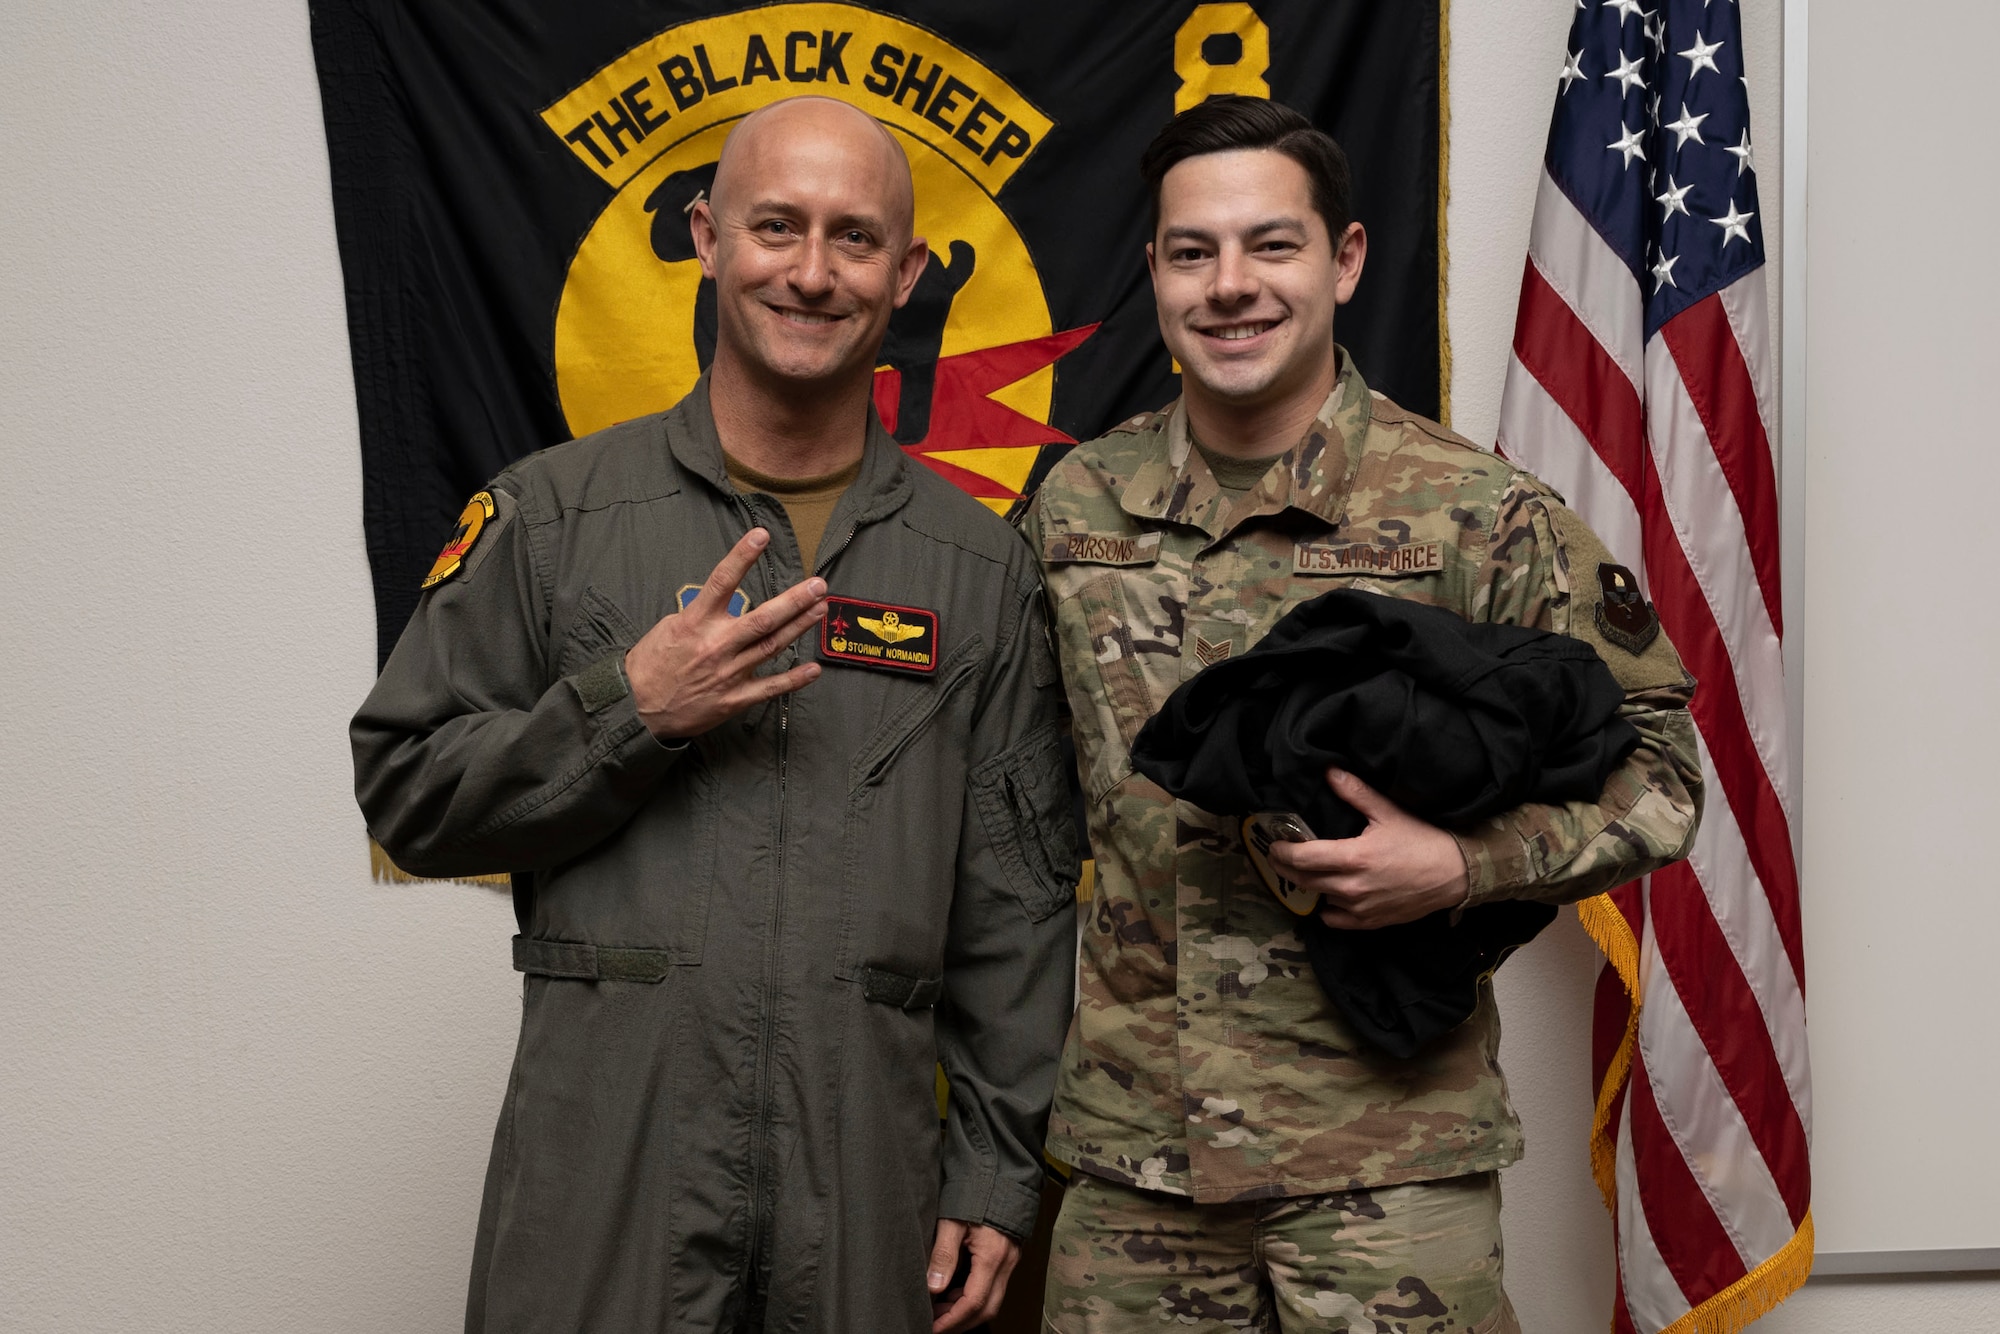 U.S. Air Force Staff Sgt. Connor Parsons, 8th Aircraft Maintenance Unit crew chief, right, poses for a photo with U.S. Air Force Lt. Col. George Normandin, 8th Fighter Squadron commander, during a Dedicated Crew Chief Appointment ceremony at Holloman Air Force Base, New Mexico, Jan. 3, 2022. To receive the title of DCC, a crew chief must demonstrate a history of superior performance in their career, comply with all safety practices and complete all required training. (U.S. Air Force photo by Senior Airman Antonio Salfran)